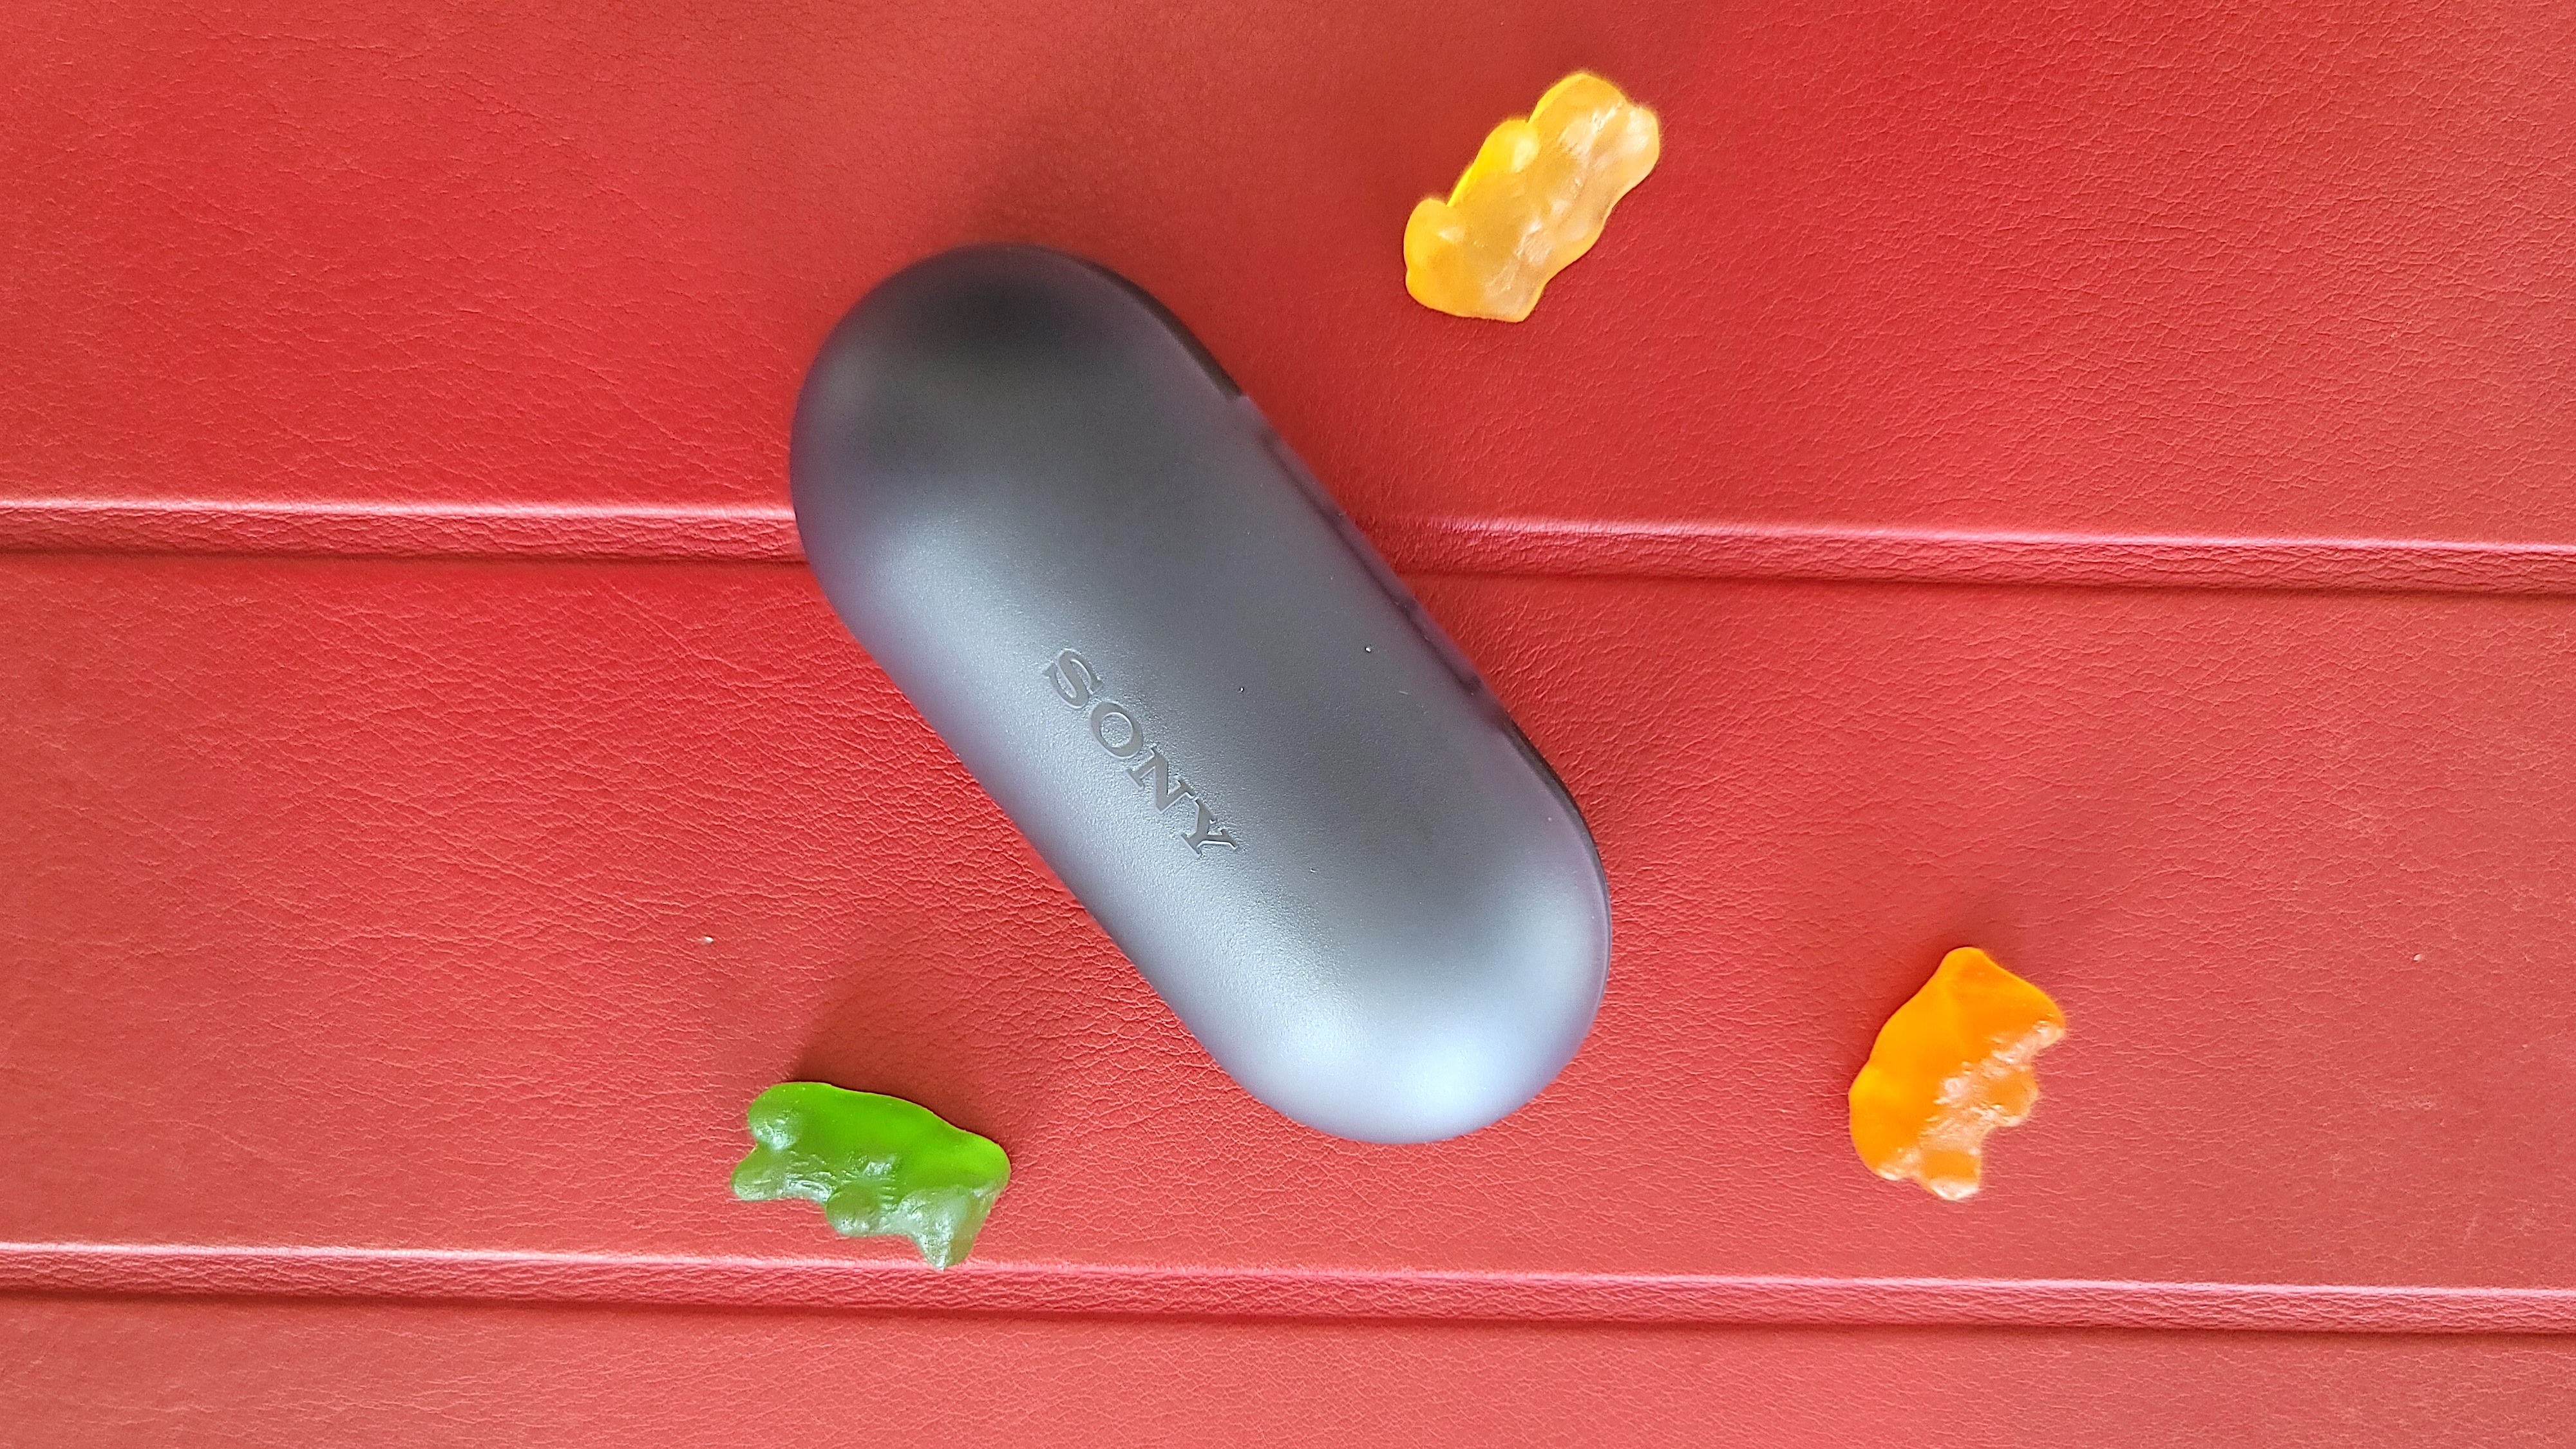 The Sony WF-C500 charging case surrounded by gummies